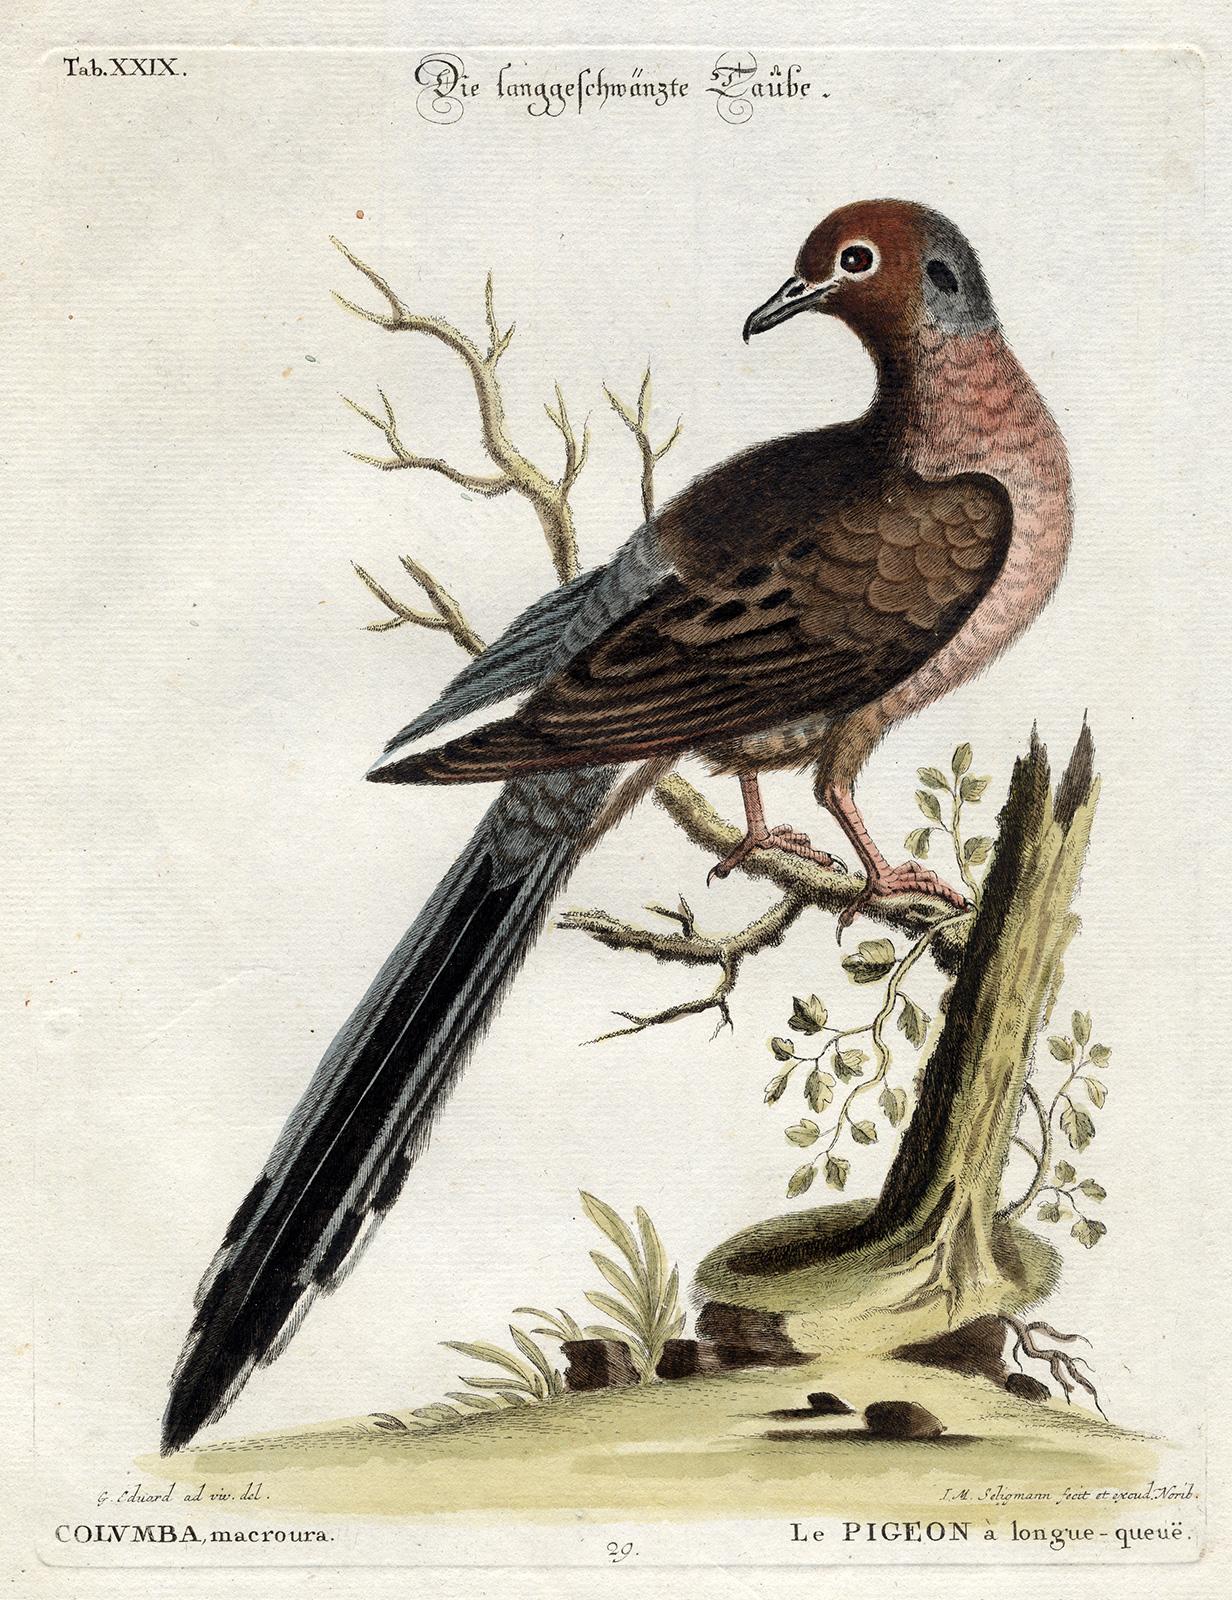 Mourning Dove by Seligmann - Handcoloured etching - 18th century - Print by Johann Michael Seligmann